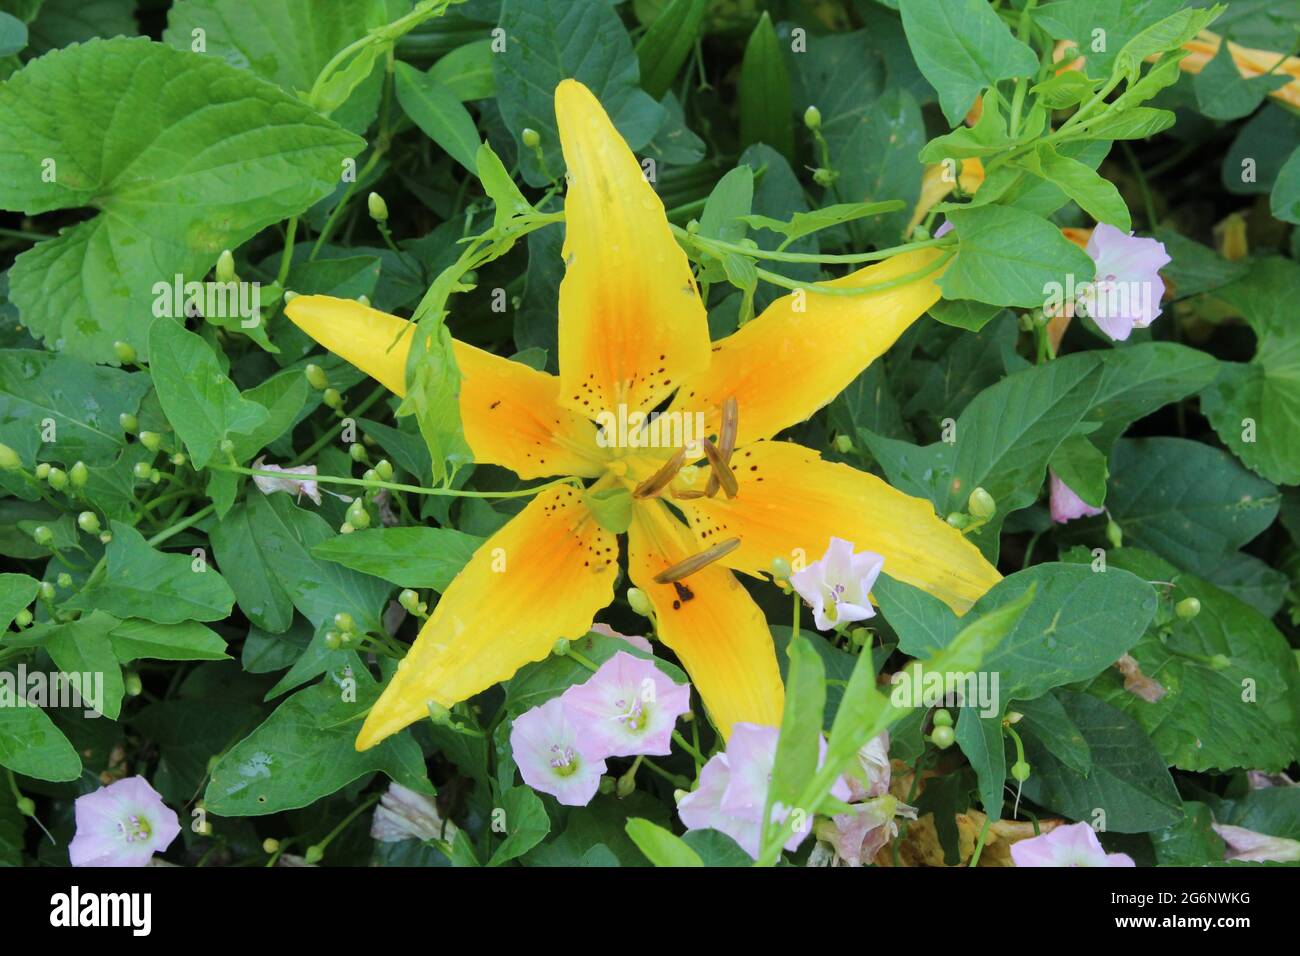 Lilies in bloom Stock Photo